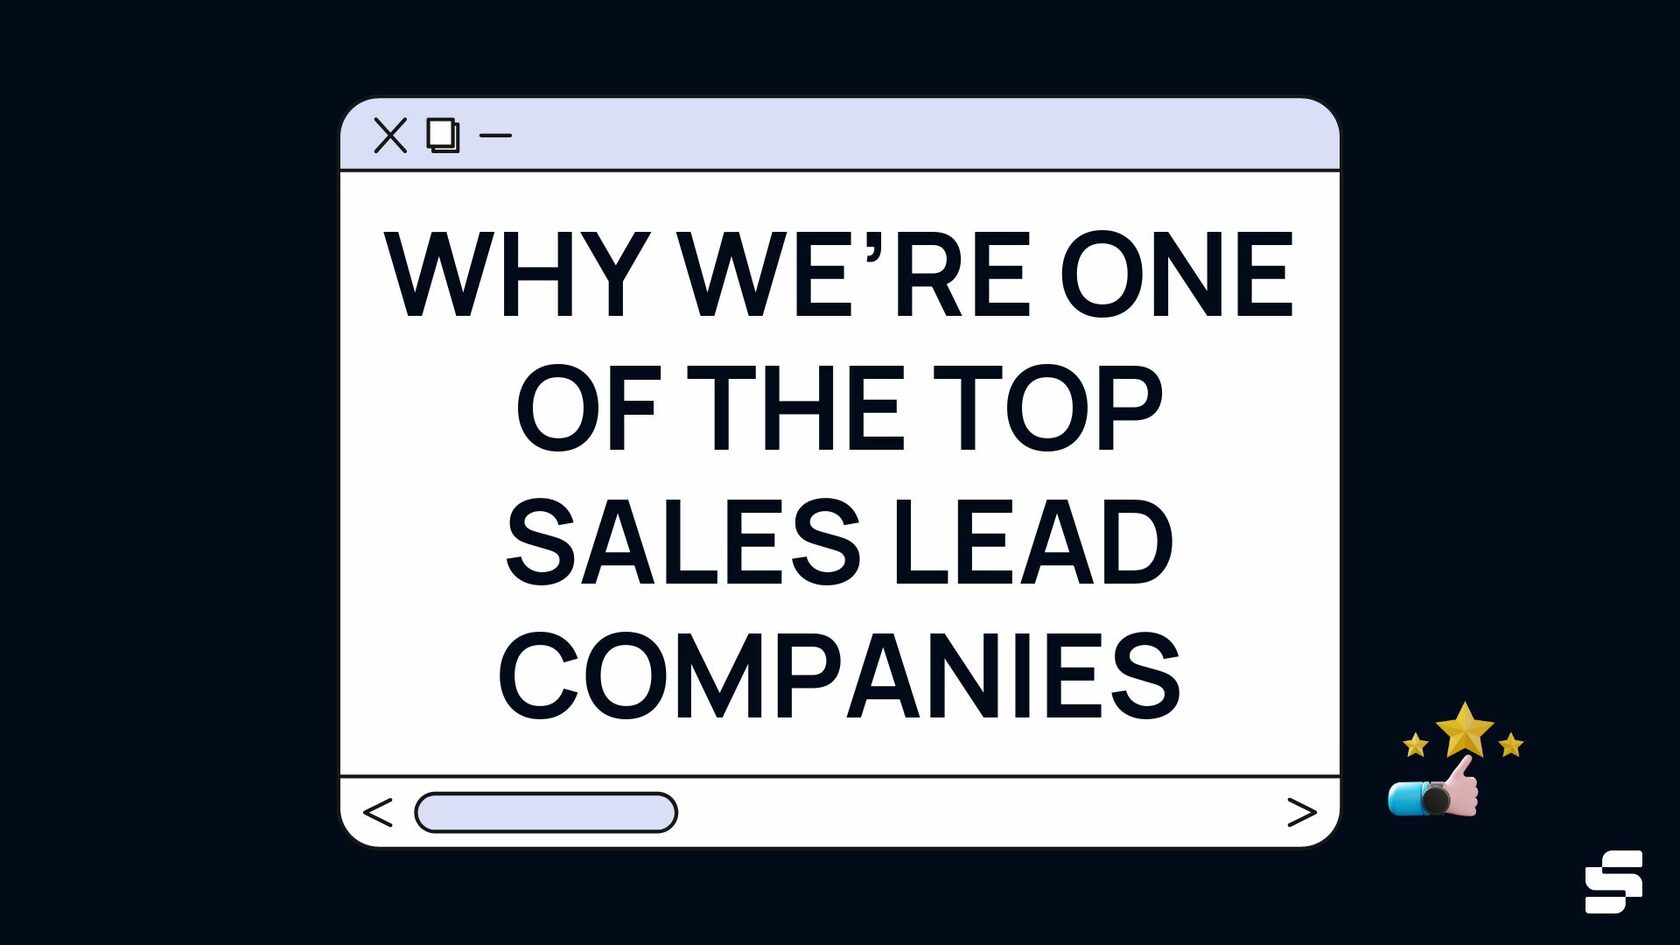 About ® - The World's Best Sales Leads®